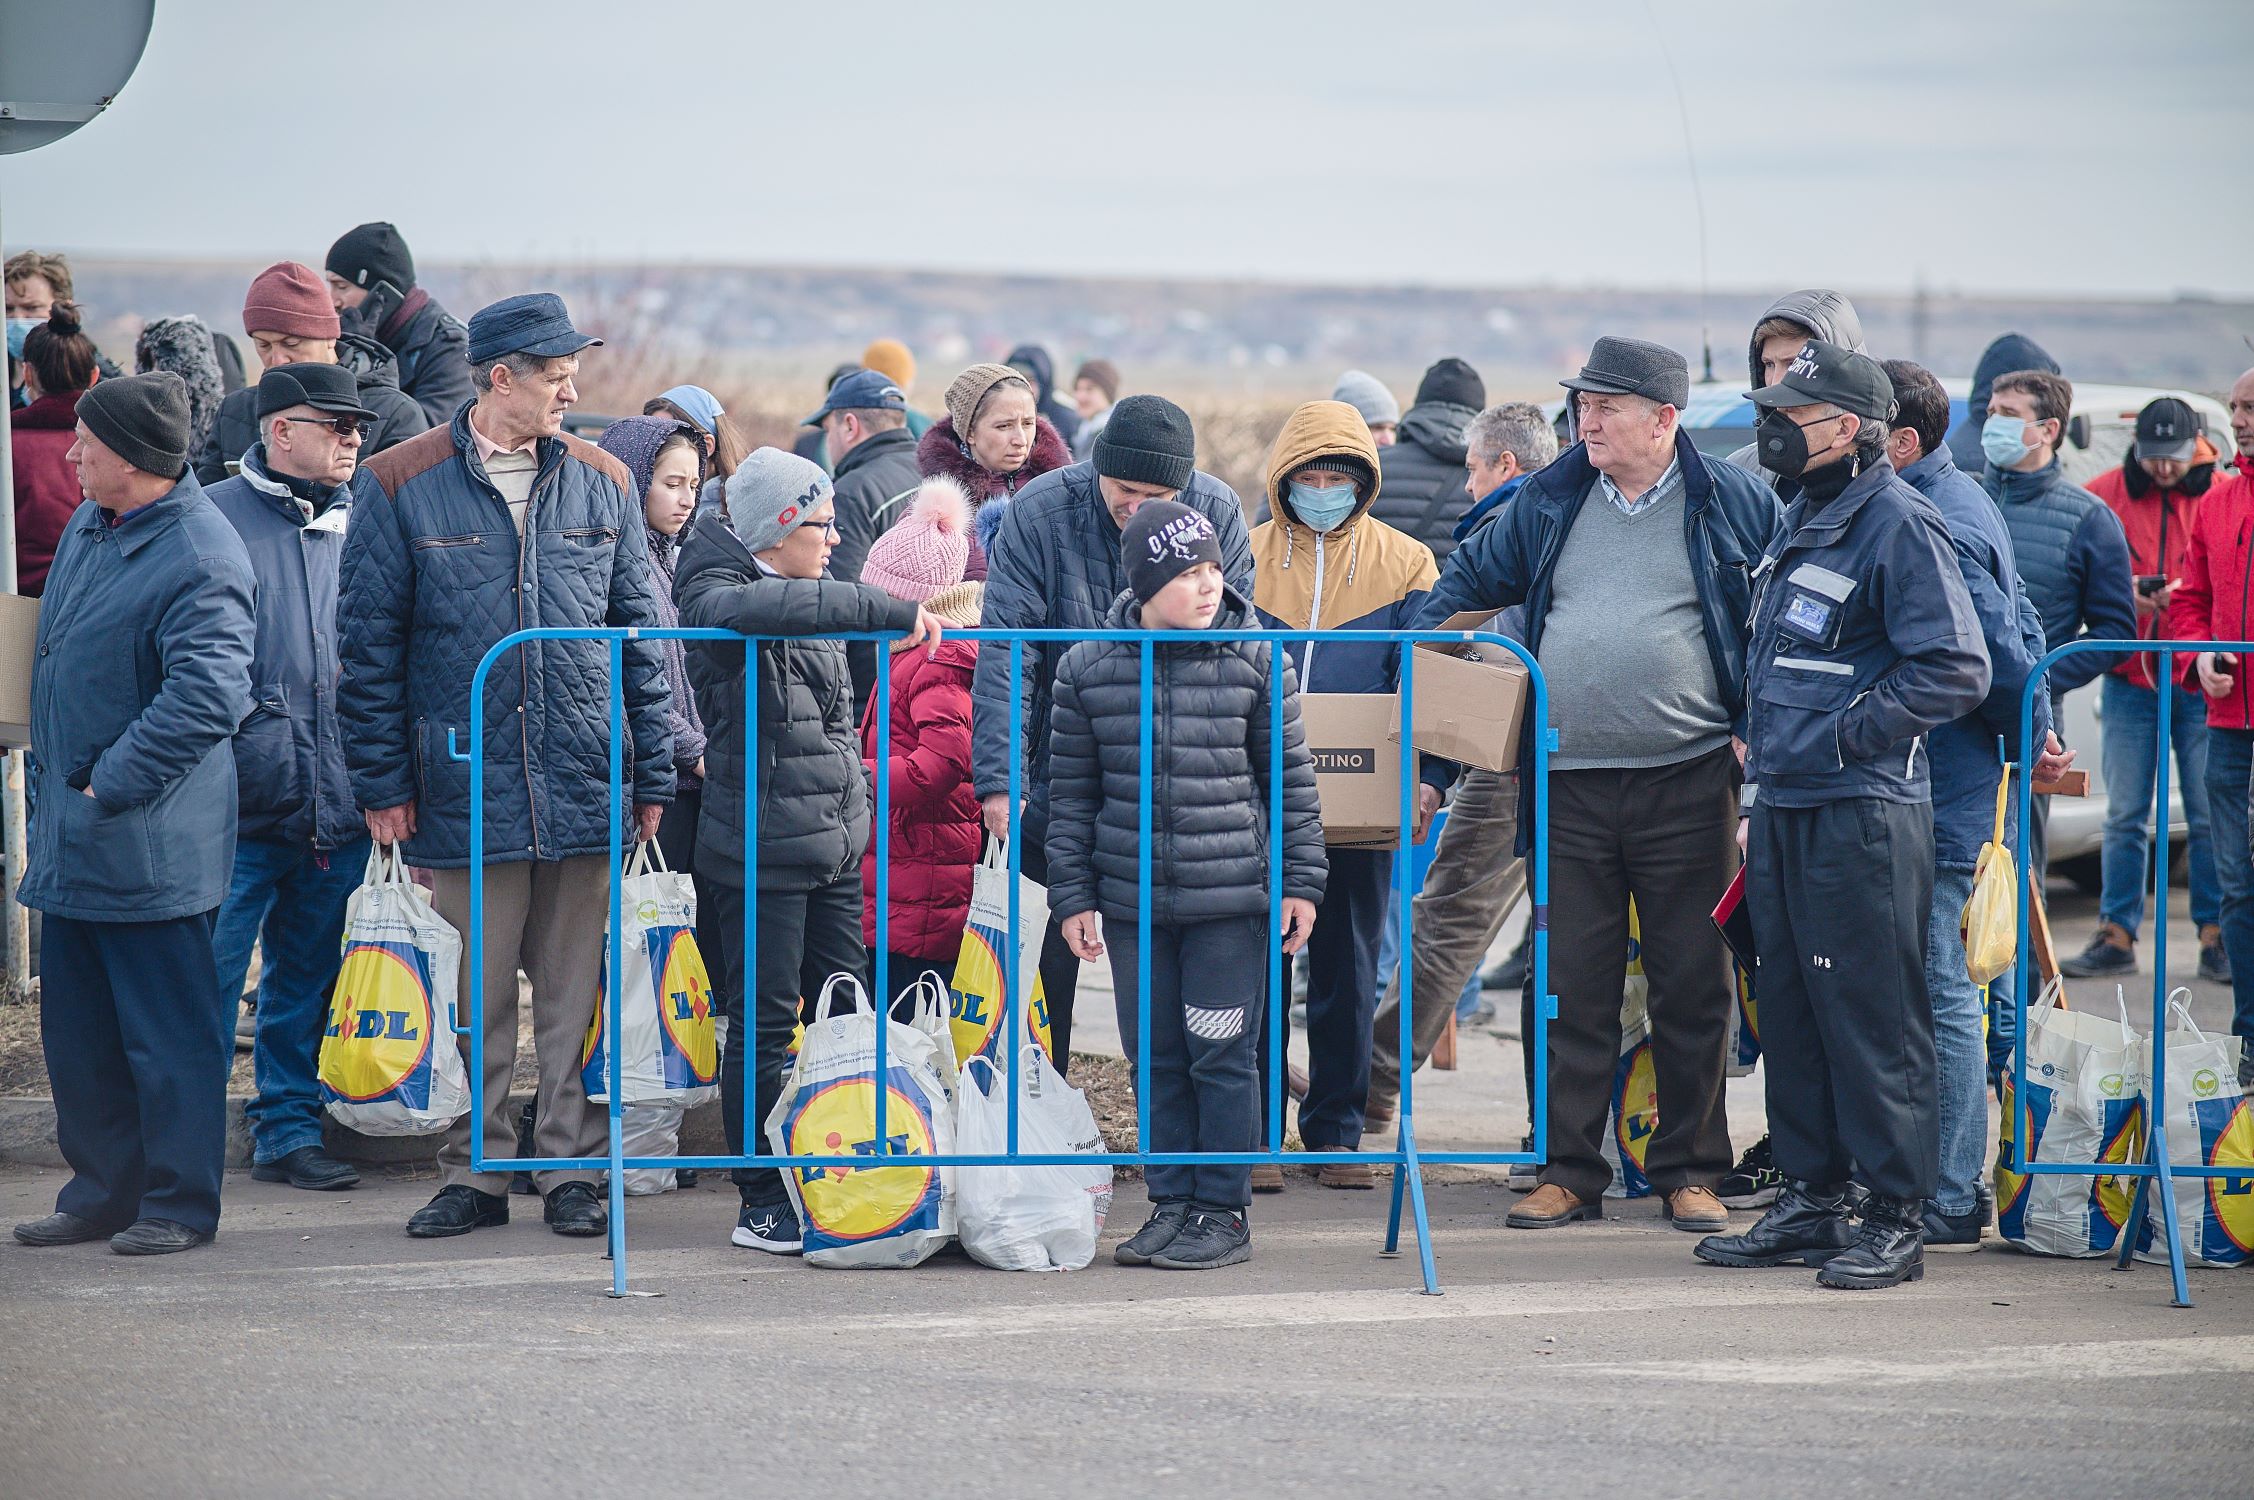 Ukrainian people are seeking refuge in Romania, pictured with luggage behind a barrier